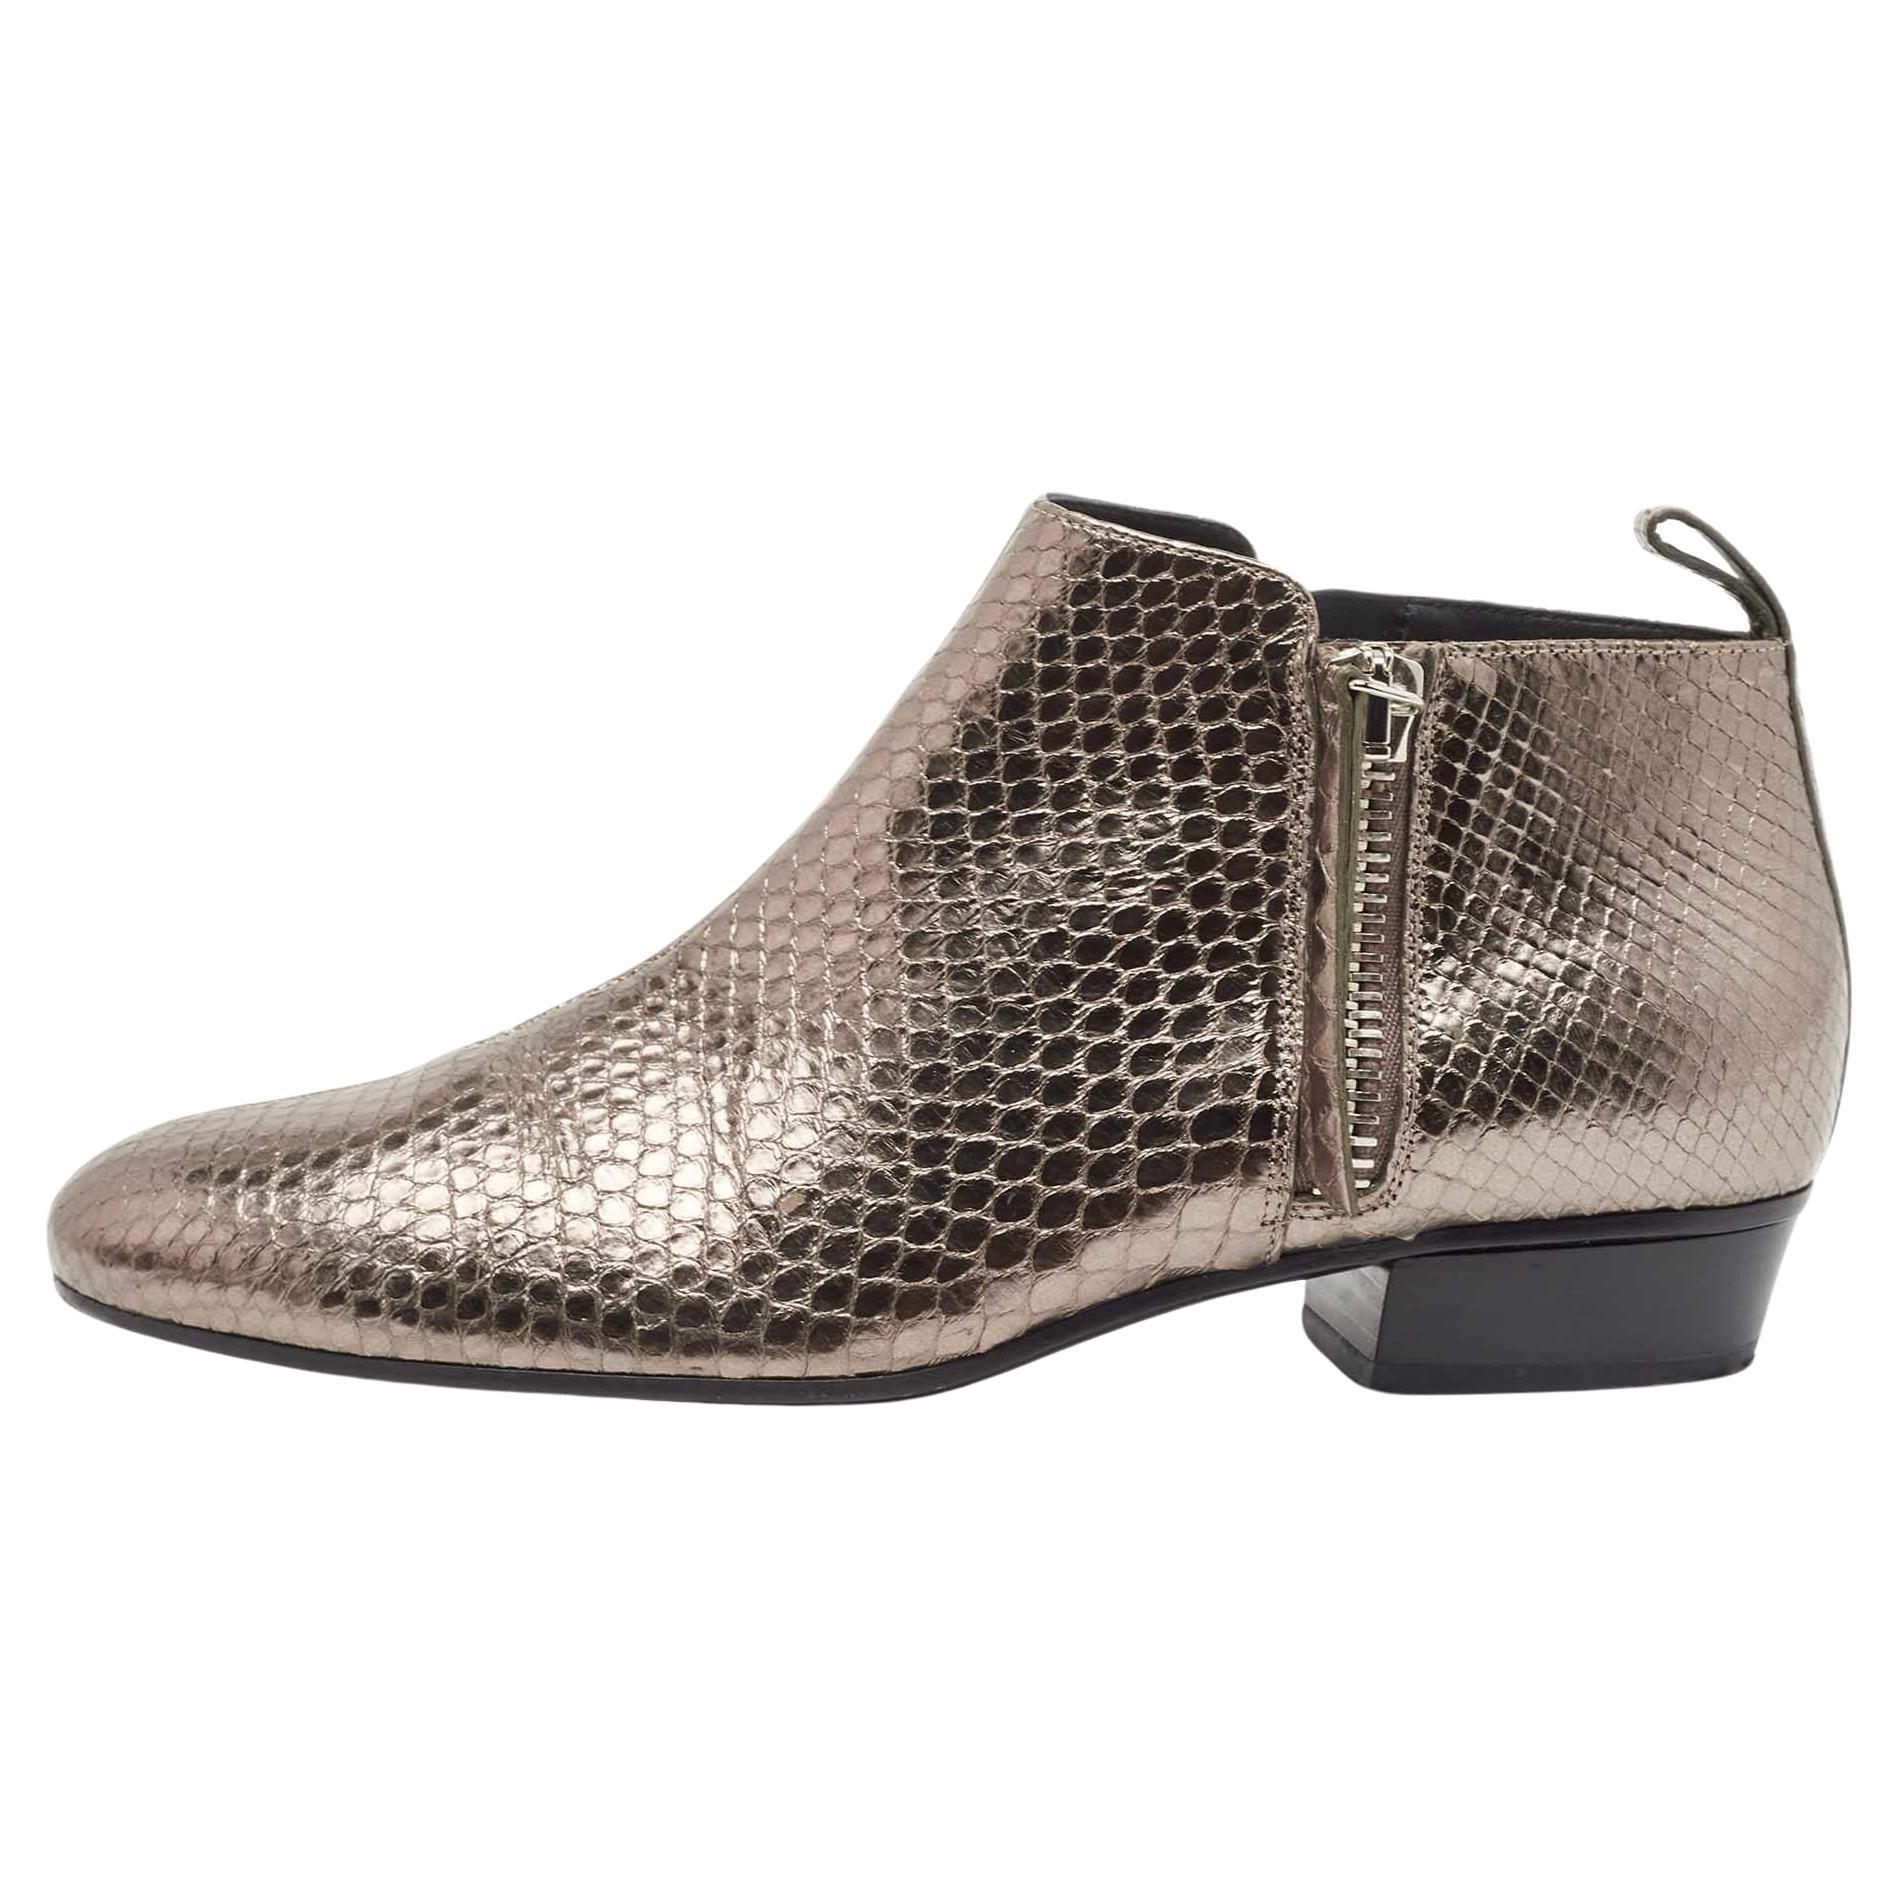  Gucci Metallic Embossed Python Ankle Boots Size 37 For Sale